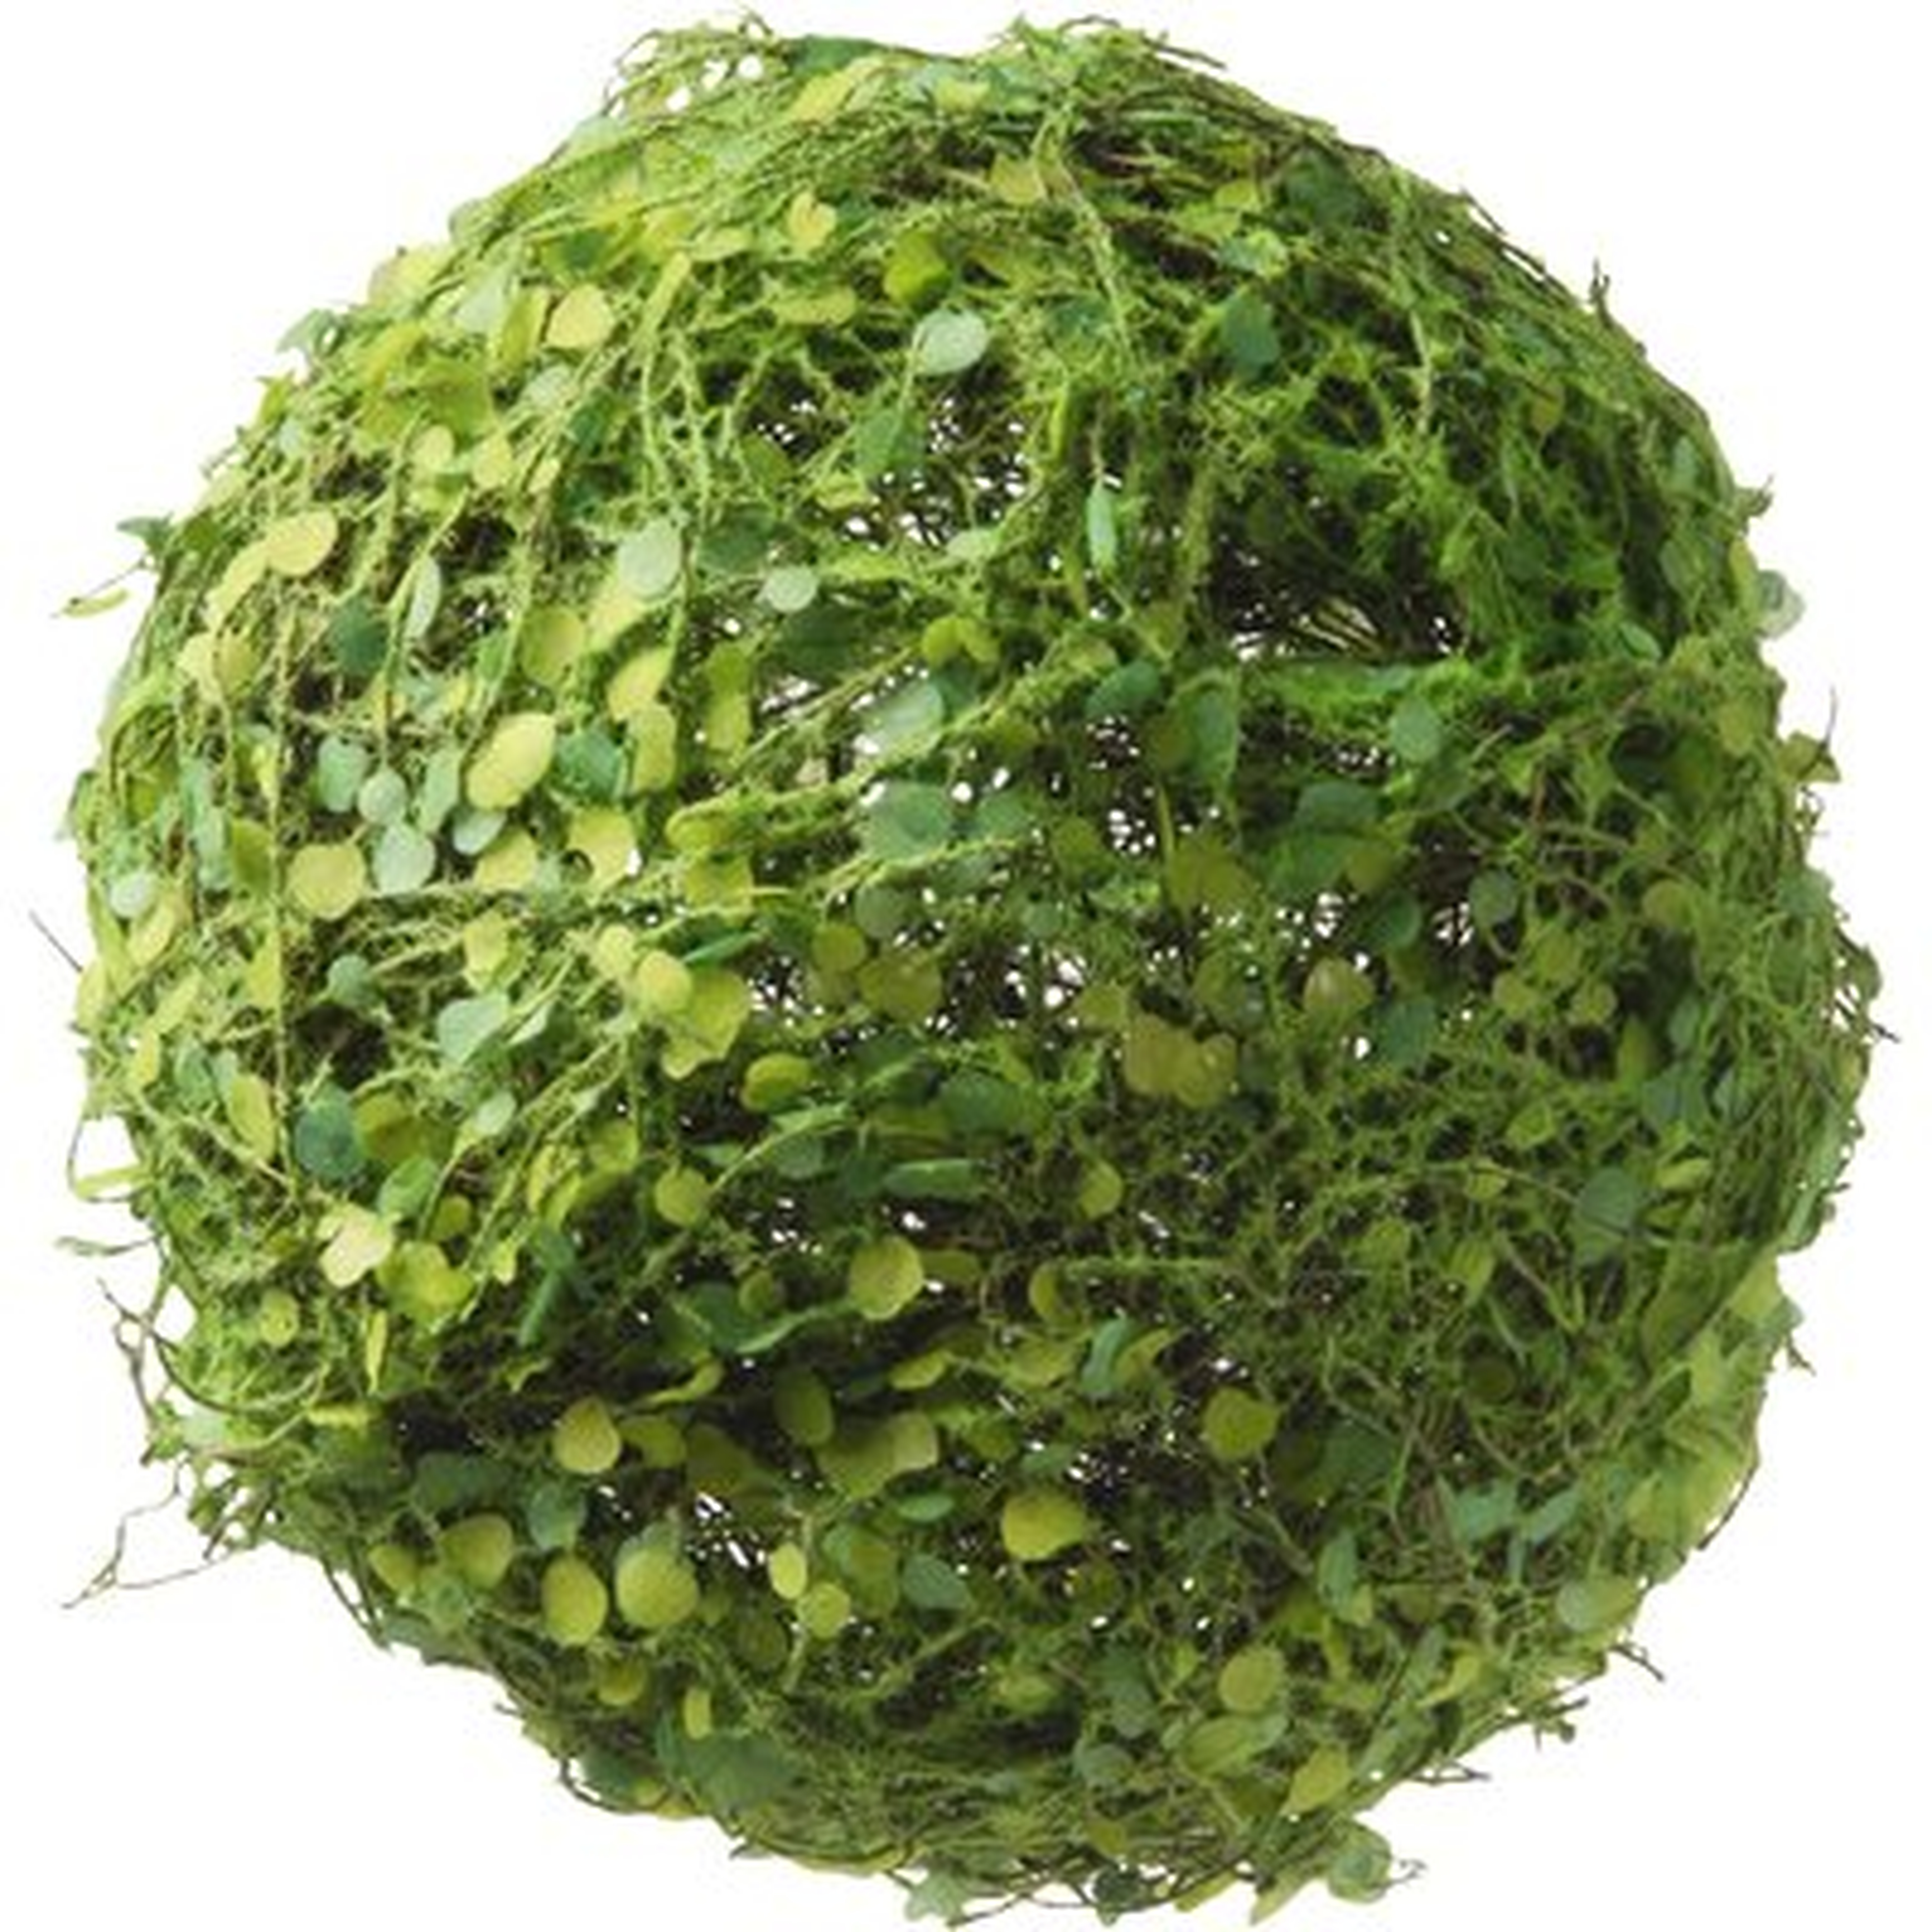 Decorative Moss and Leaves Ball - Birch Lane